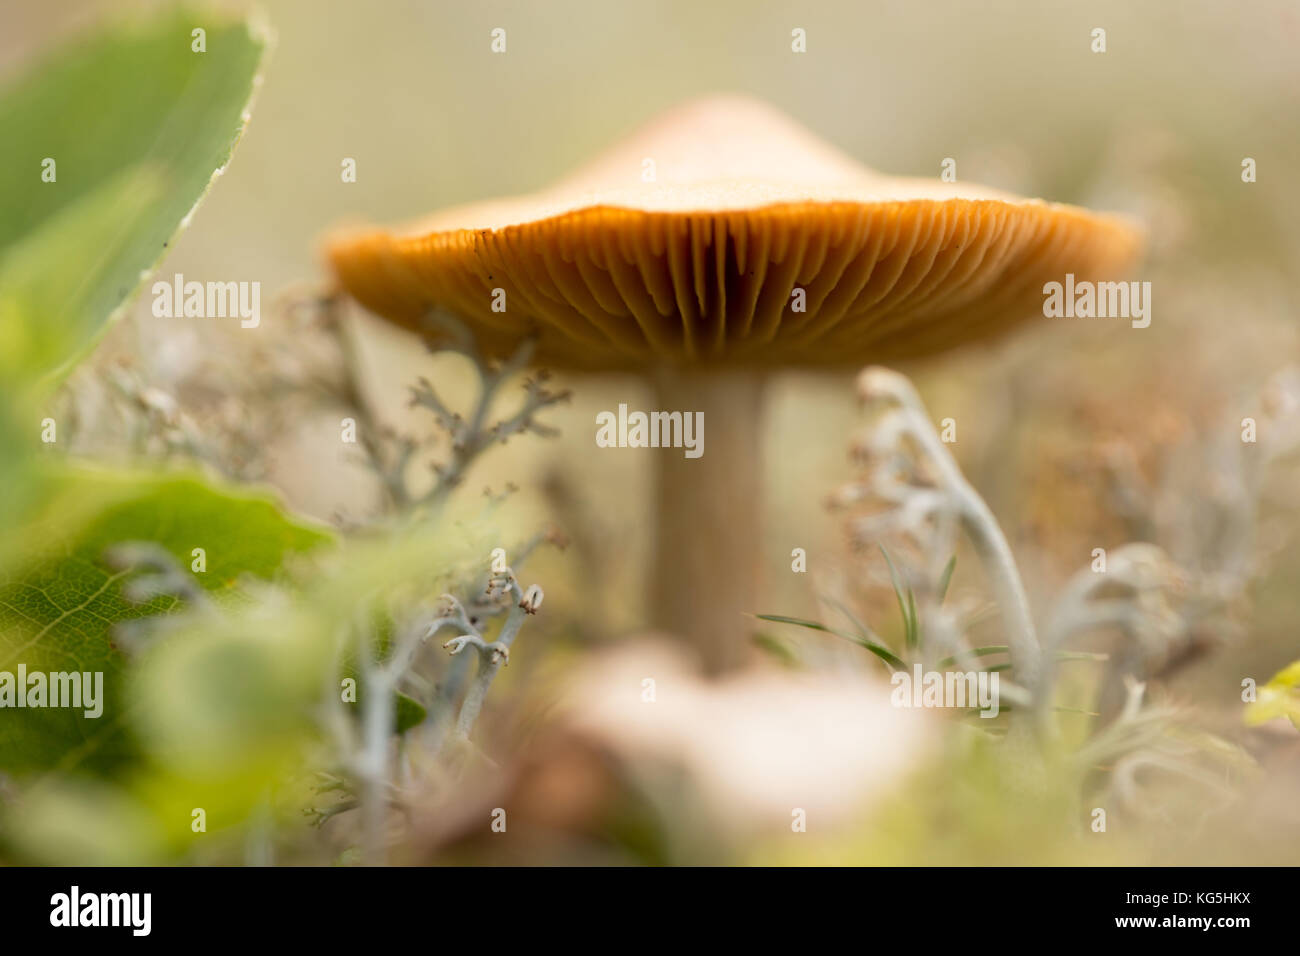 Close-up of single tiny mushroom, lichen in foregroung Stock Photo